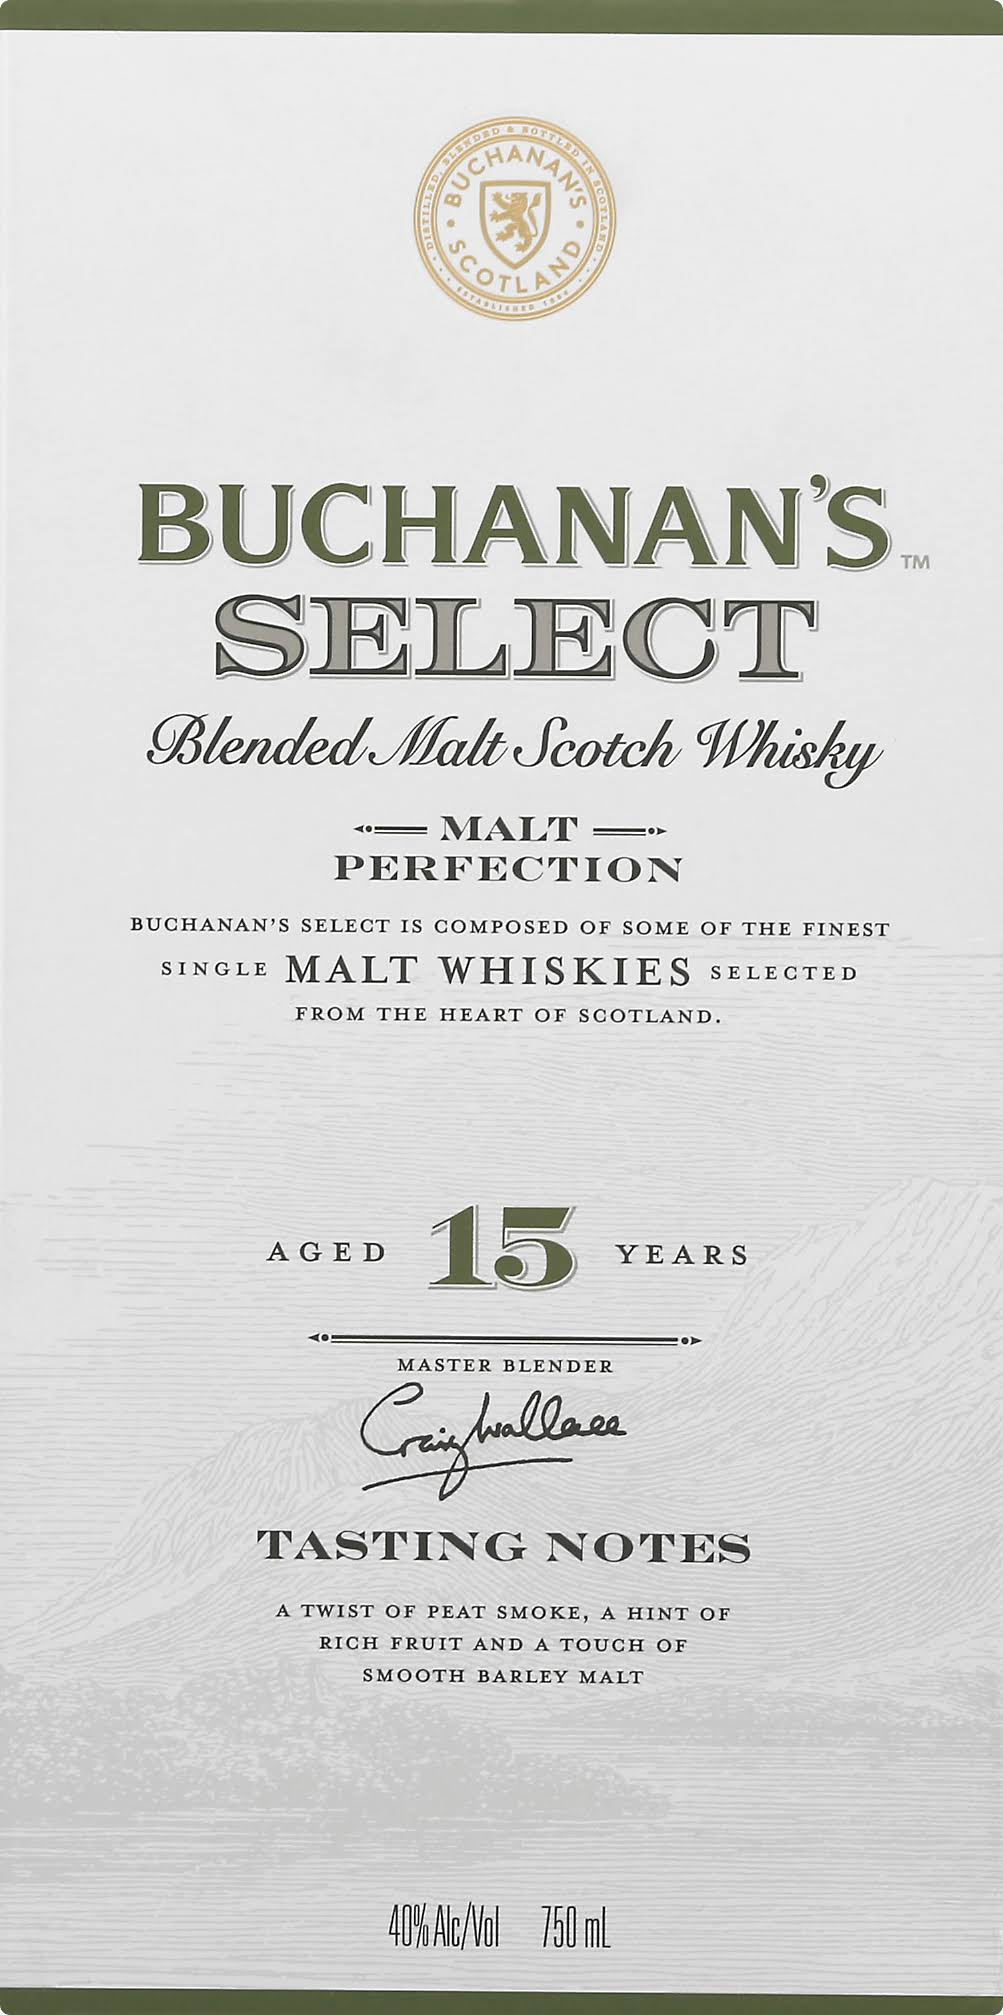 Buchanan's Select 15 Years Old Blended Malt Scotch Whisky